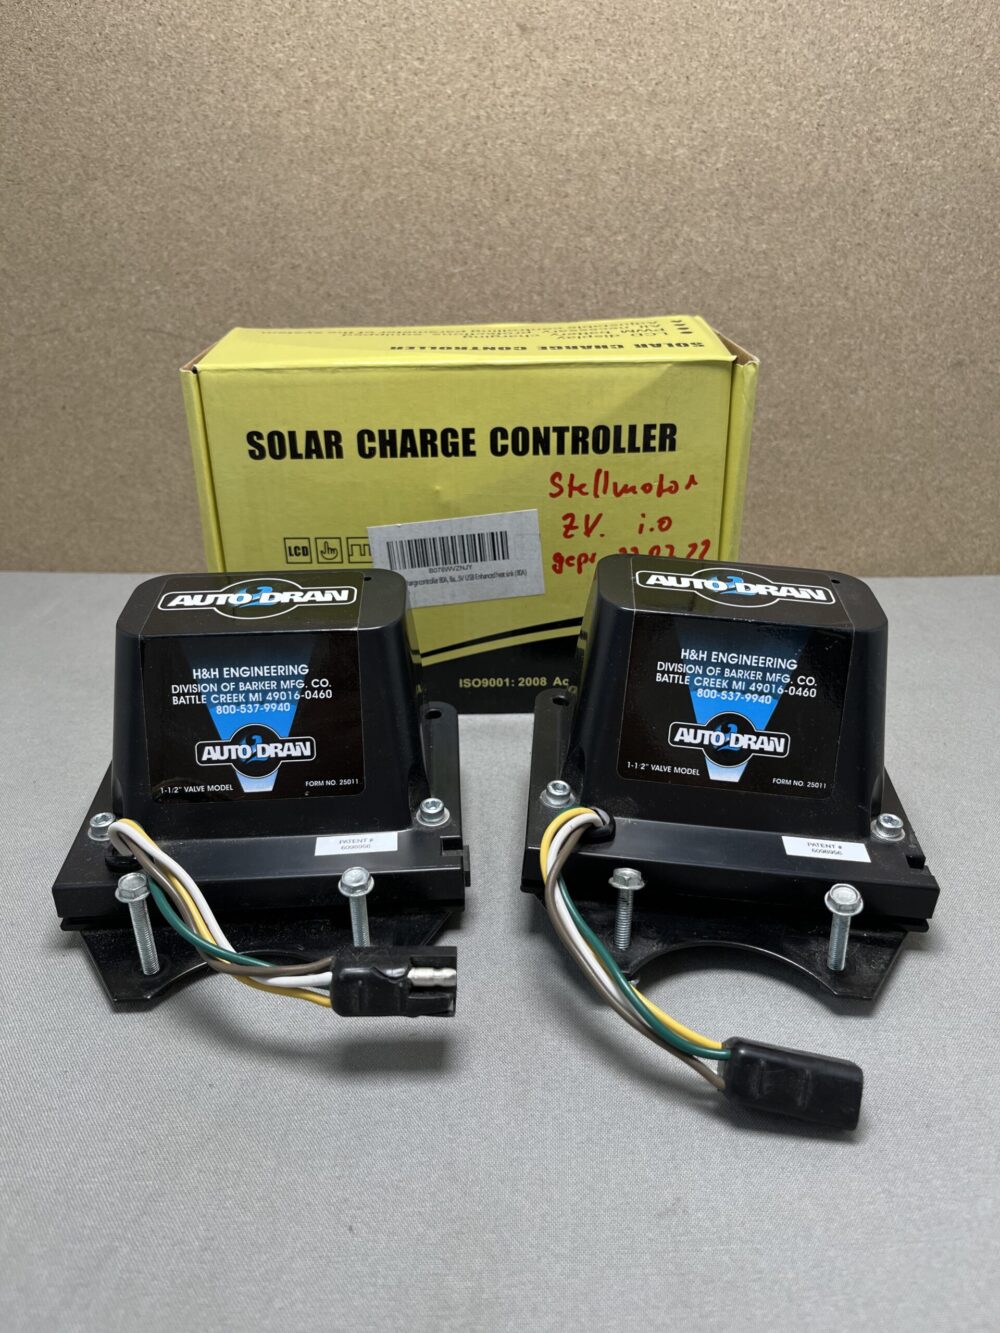 Solar Charge Controller 12724V MP80-80